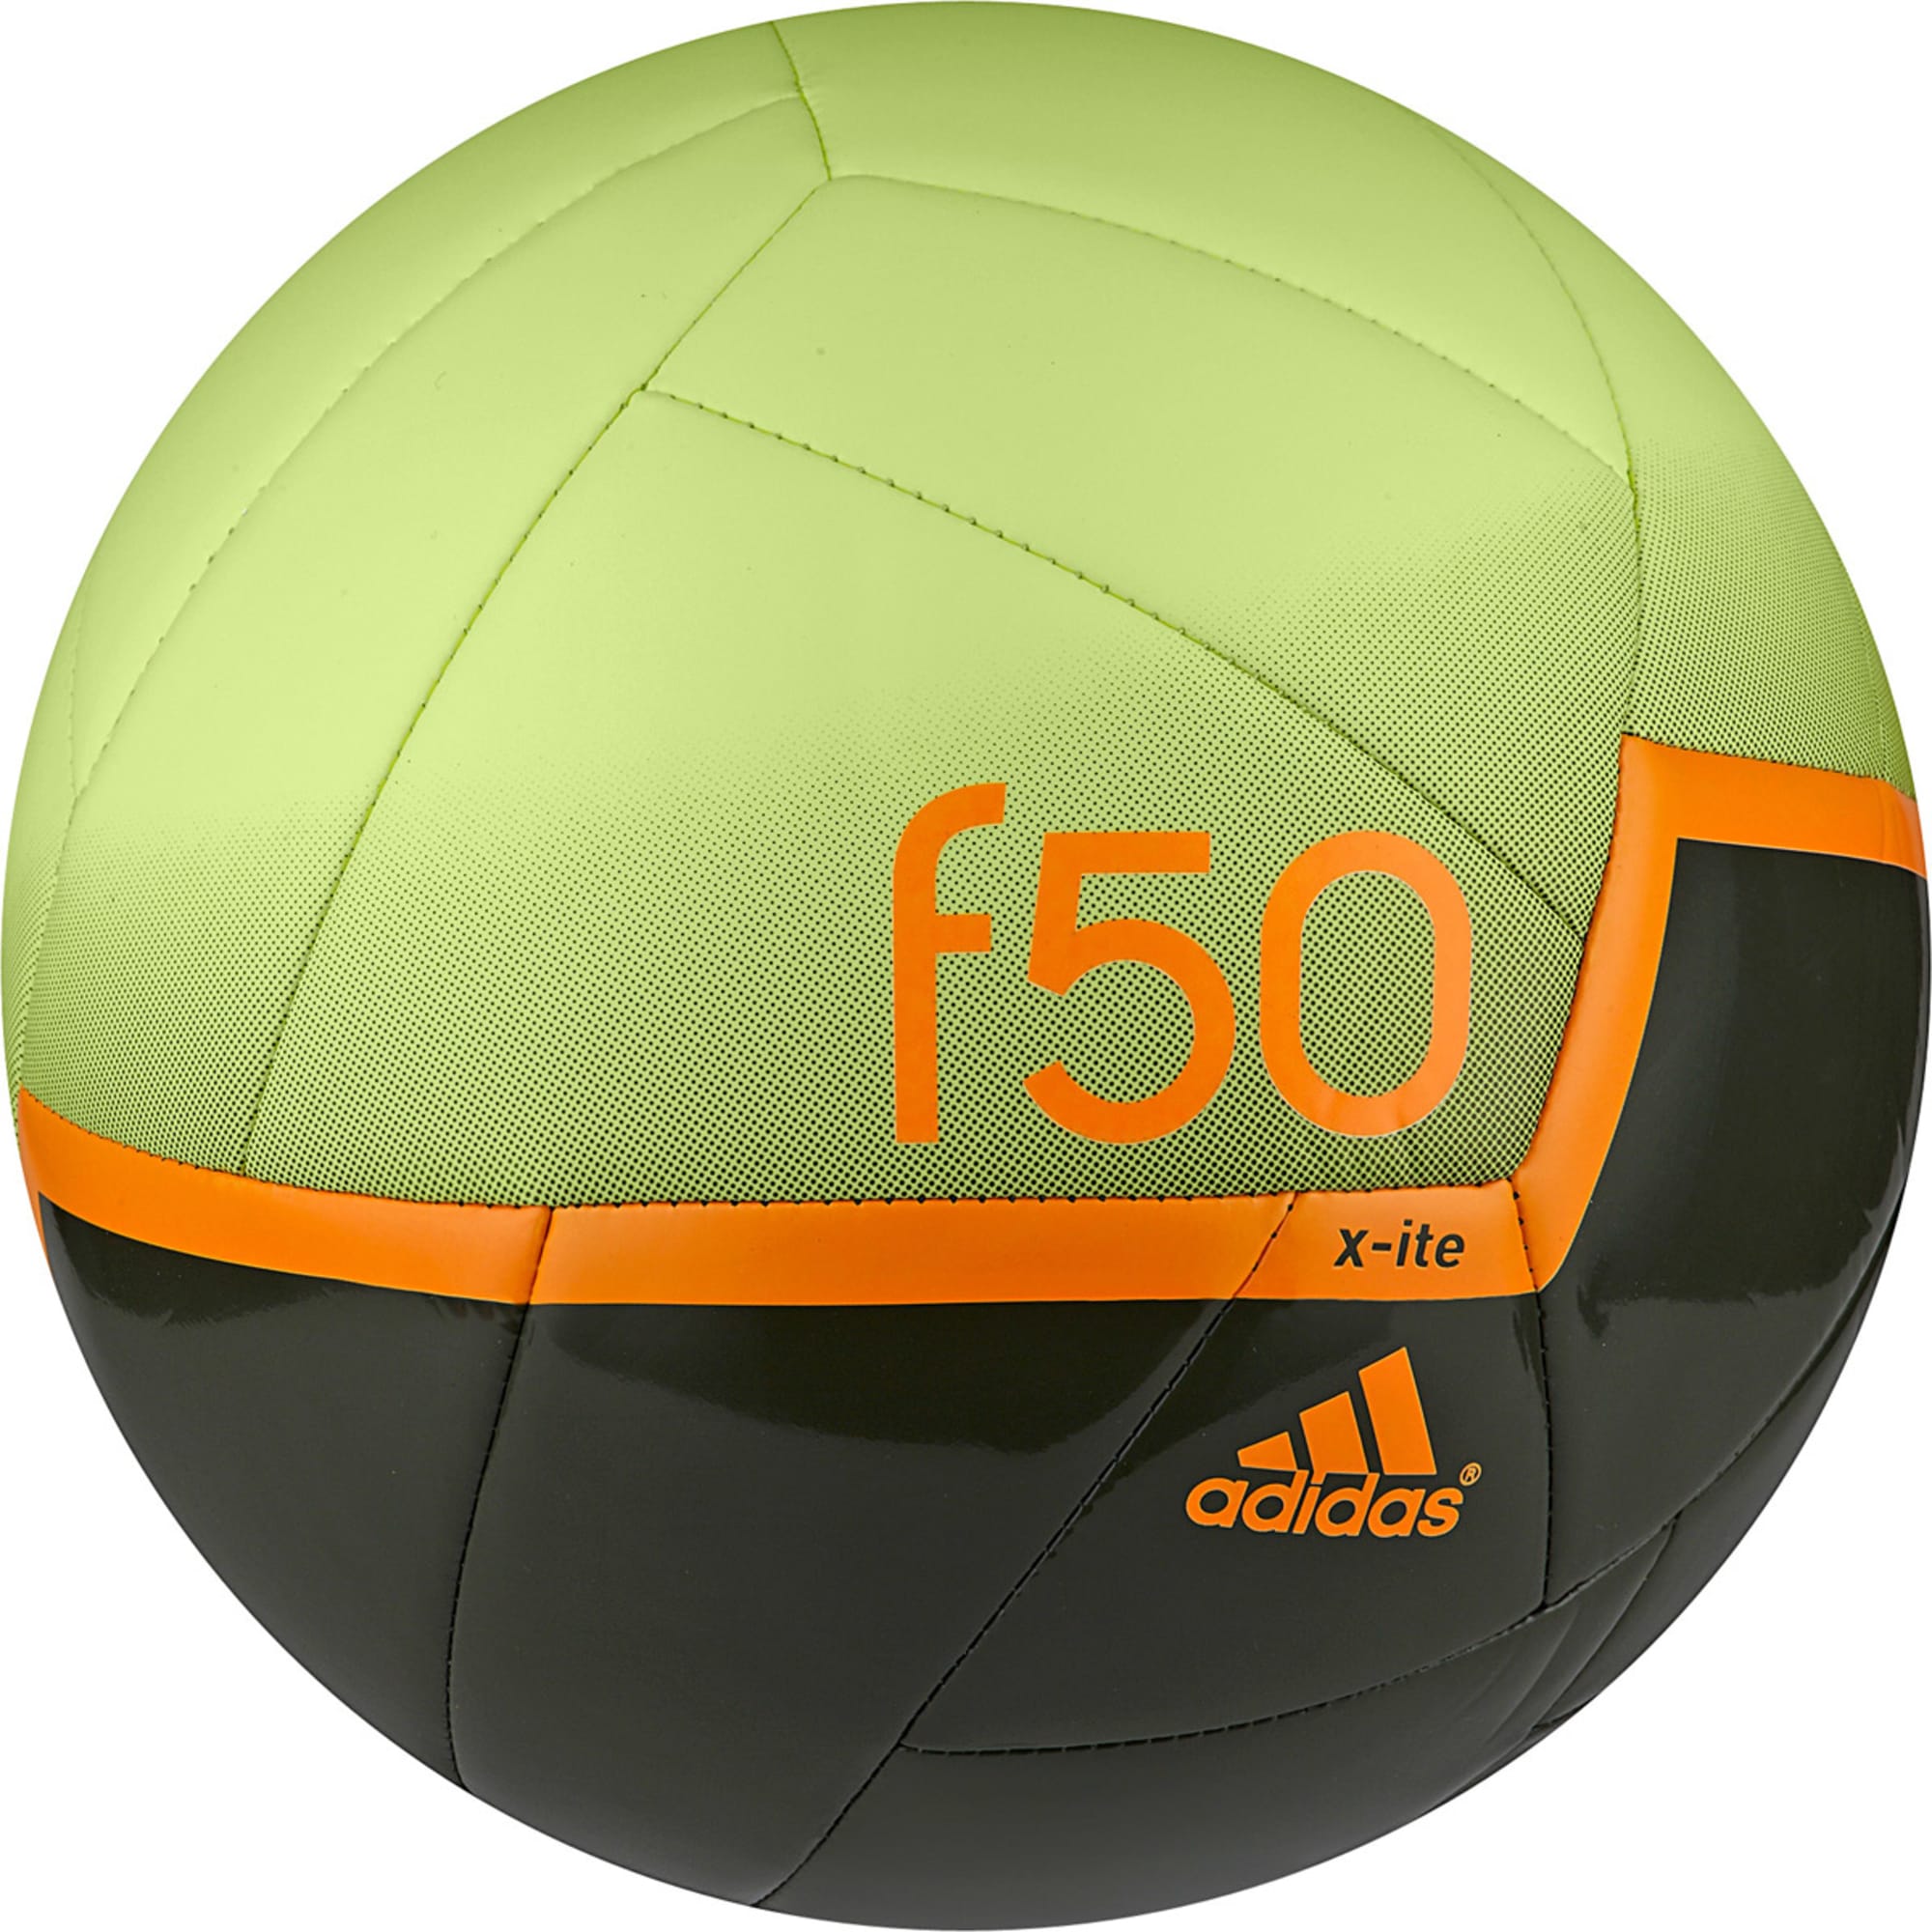 geest aflevering US dollar ADIDAS F50 X-Ite Soccer Ball - Bob's Stores